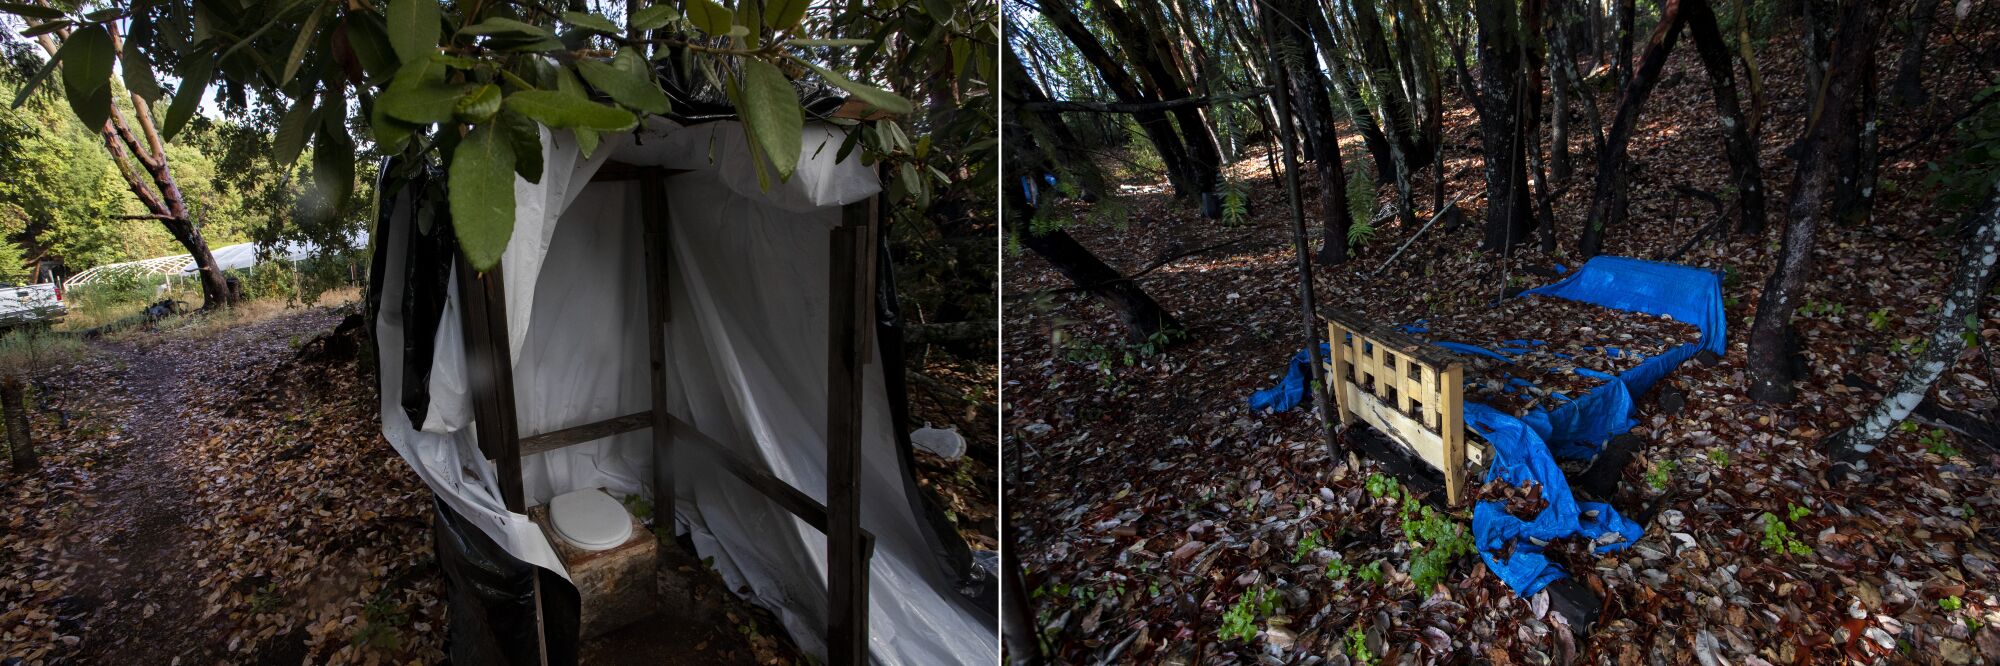 a plywood toilet and a bed in the woods near makeshift living quarters 